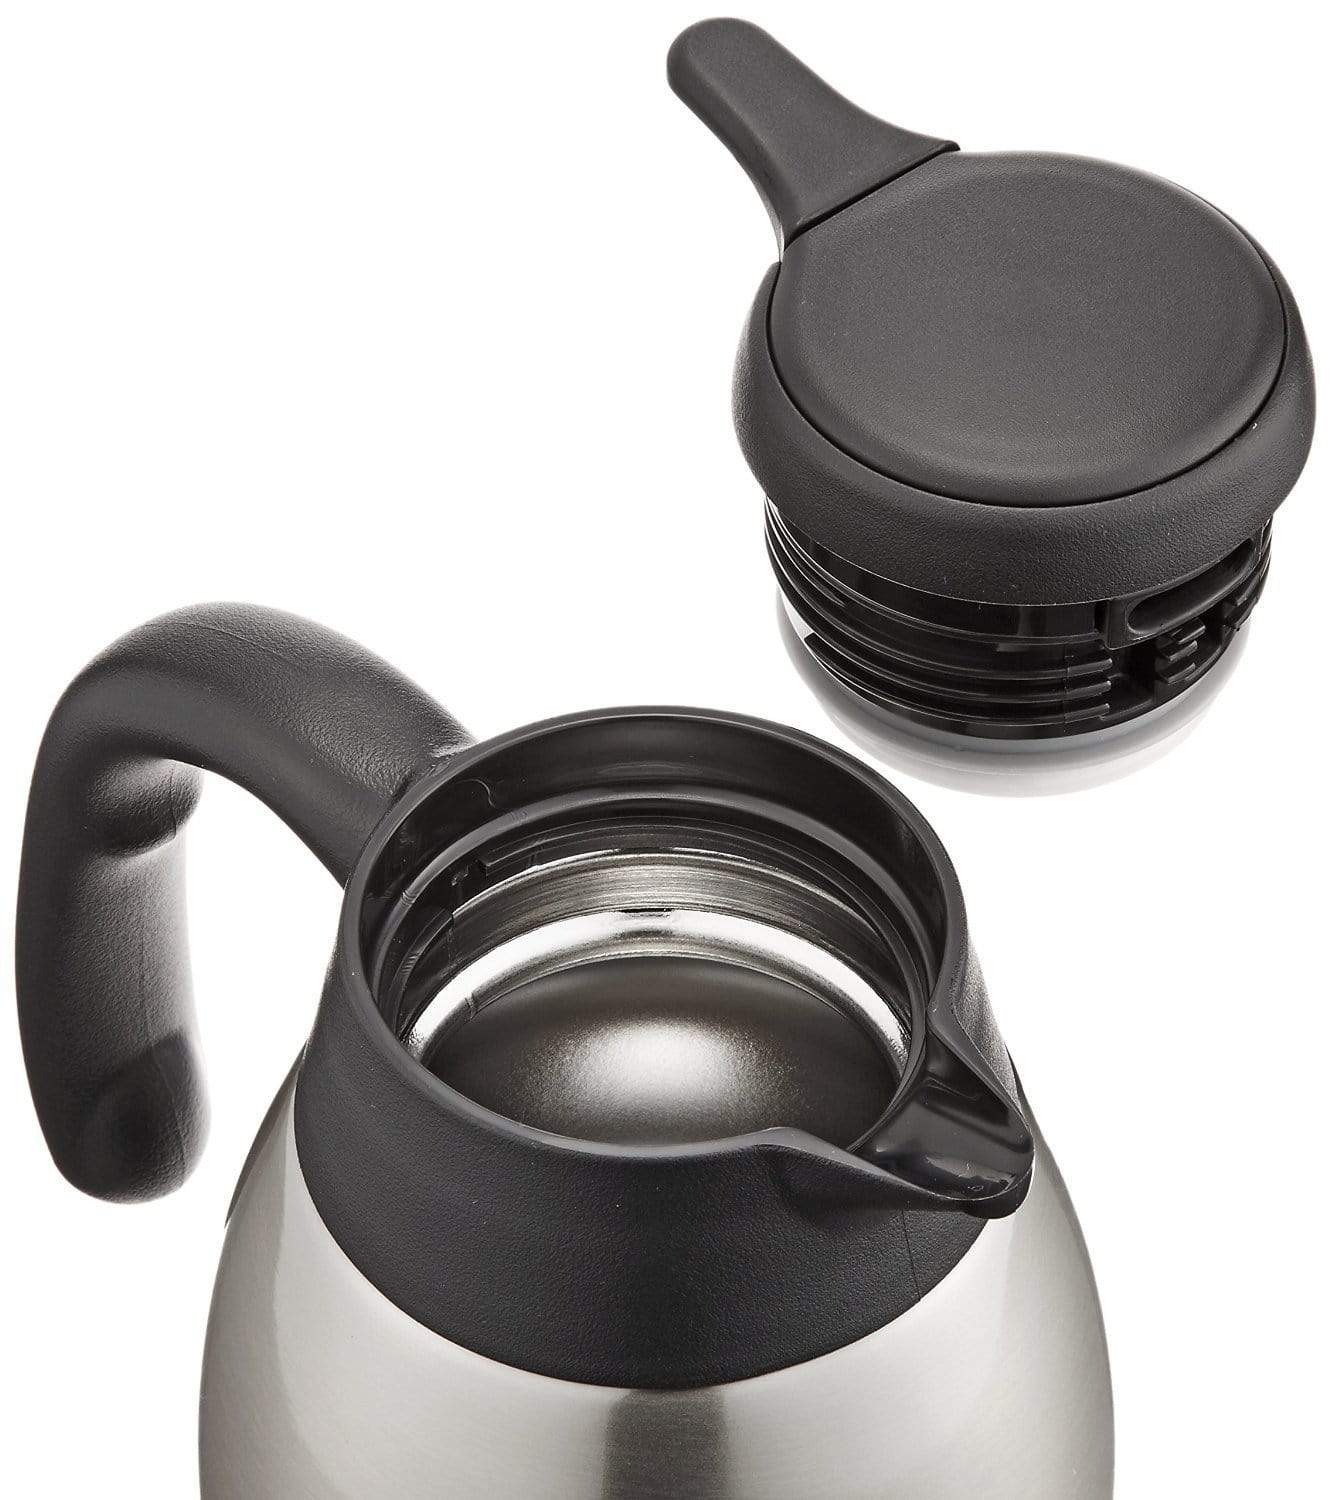 https://cdn.shopify.com/s/files/1/1610/3863/products/tiger-stainless-steel-vacuum-carafe-with-lever-action-0-6l-thermal-carafes-22489023503_1600x.jpg?v=1564004398